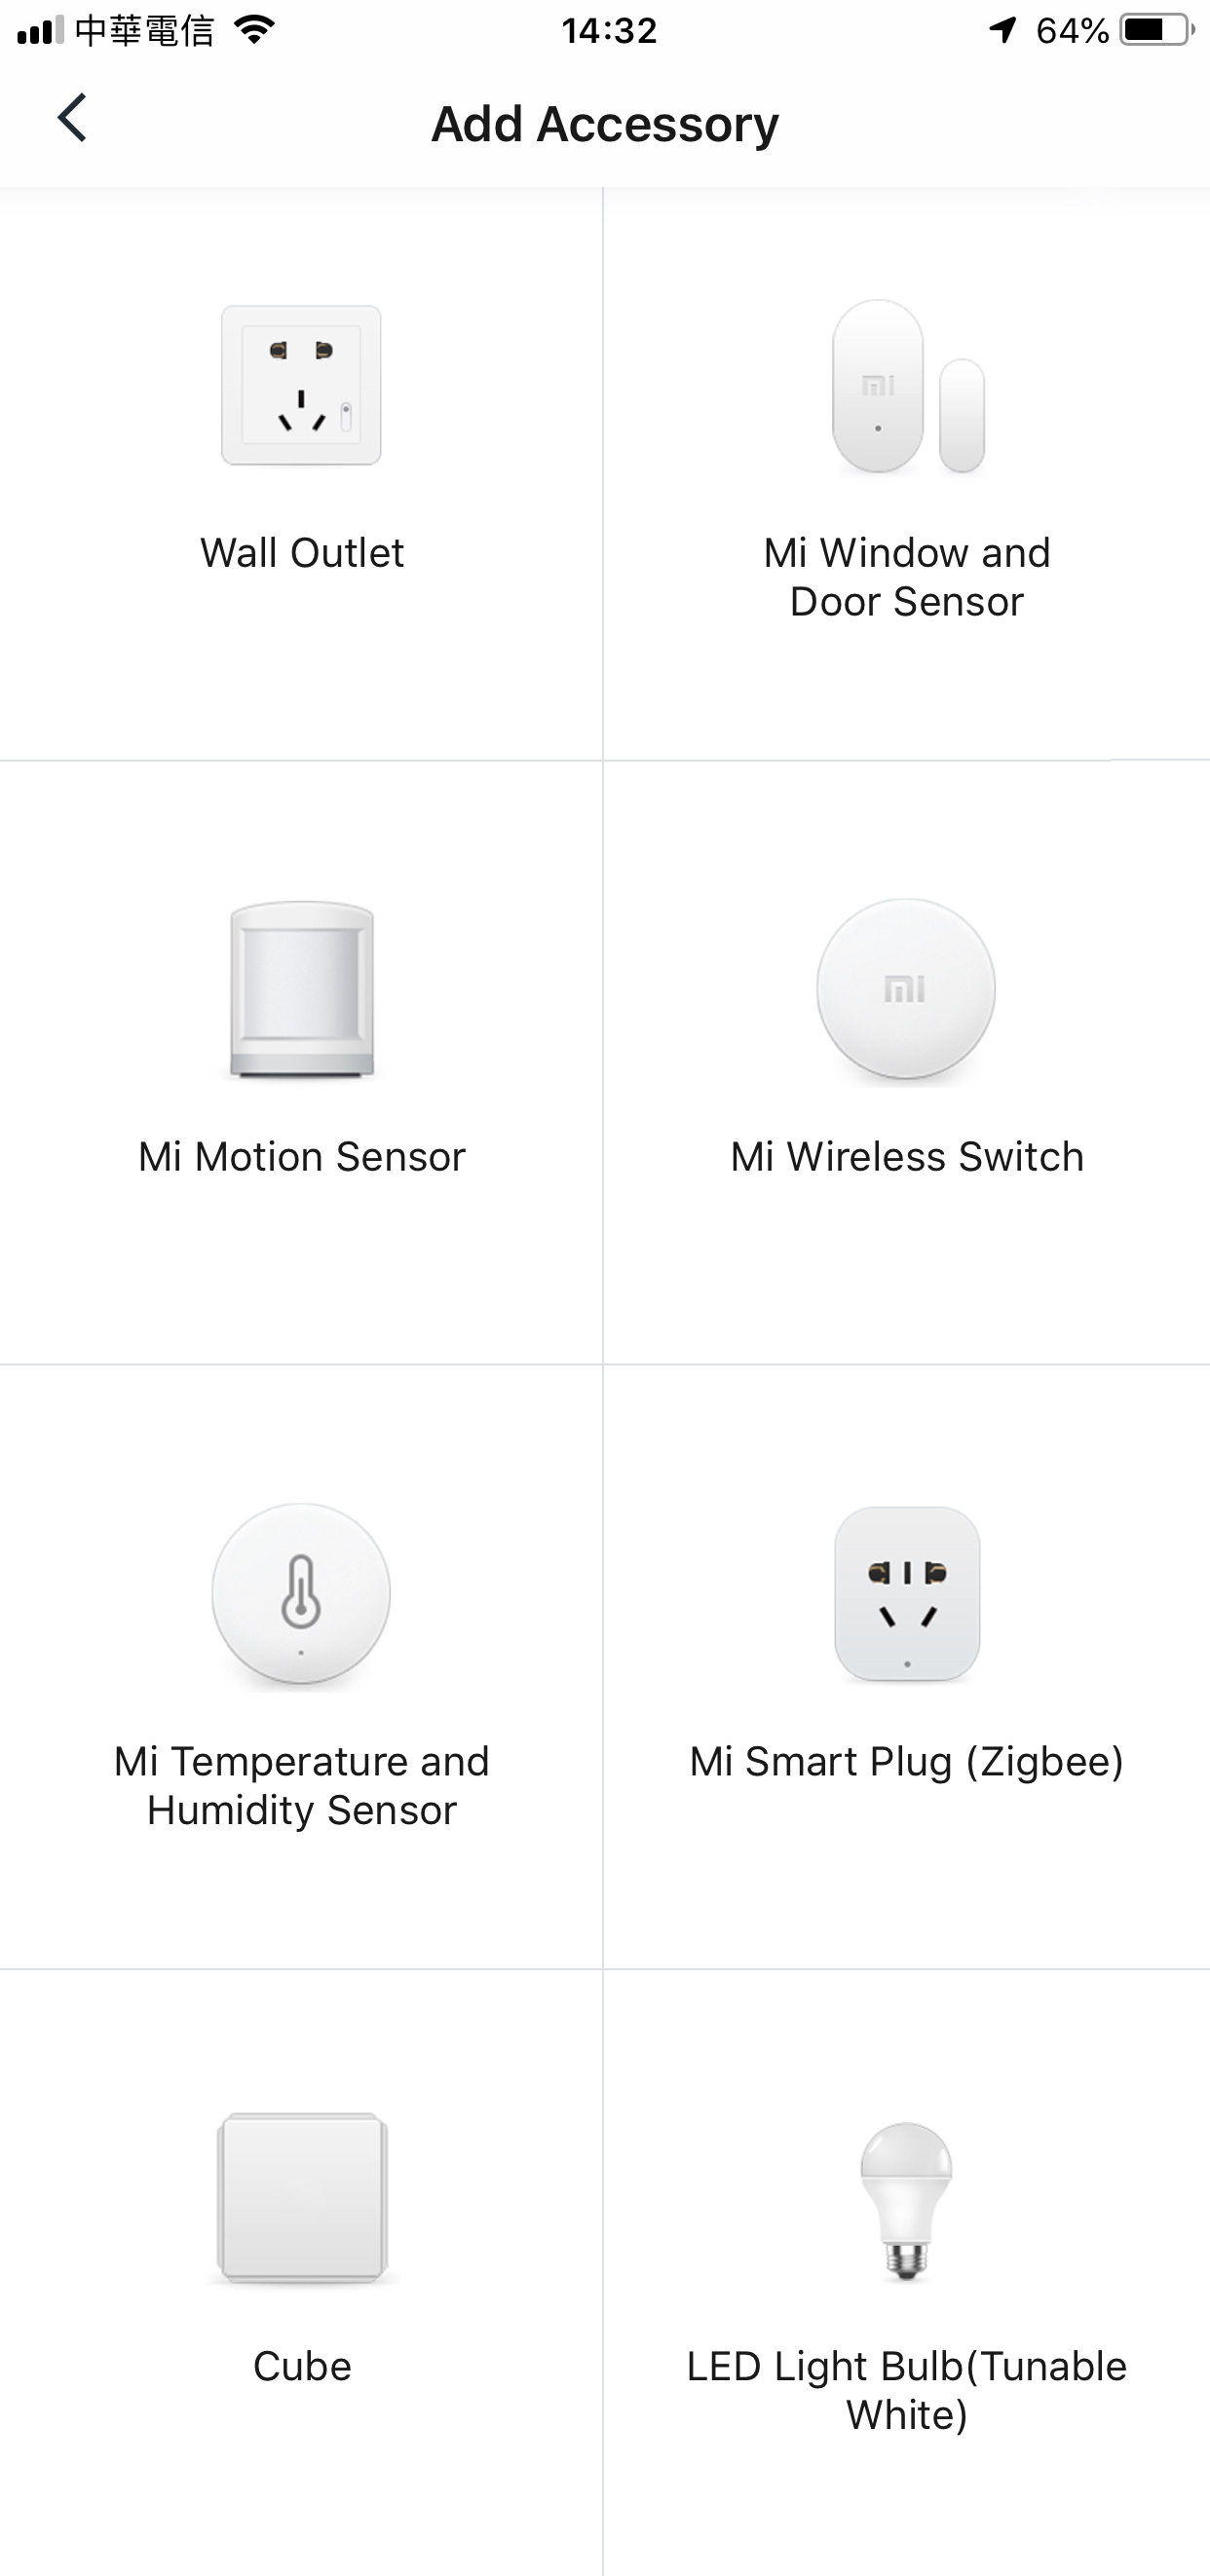 prieel Zuigeling tijdschrift Aqara updates Add Support For Some Mijia/Xiaomi Devices – Homekit News and  Reviews